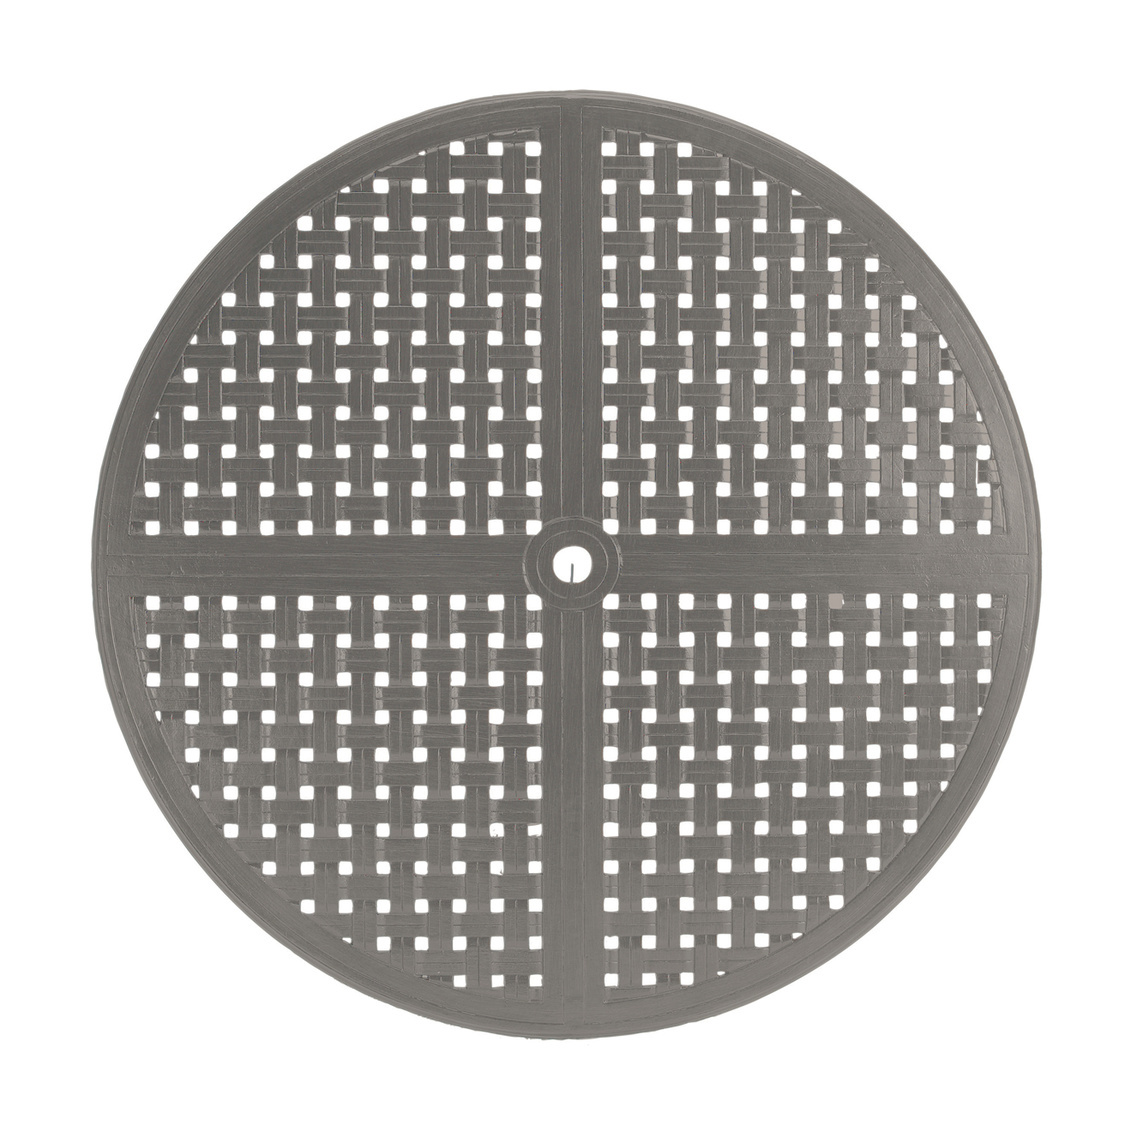 double lattice 48 inch round table top (hole) in slate grey (w/ hole) product image